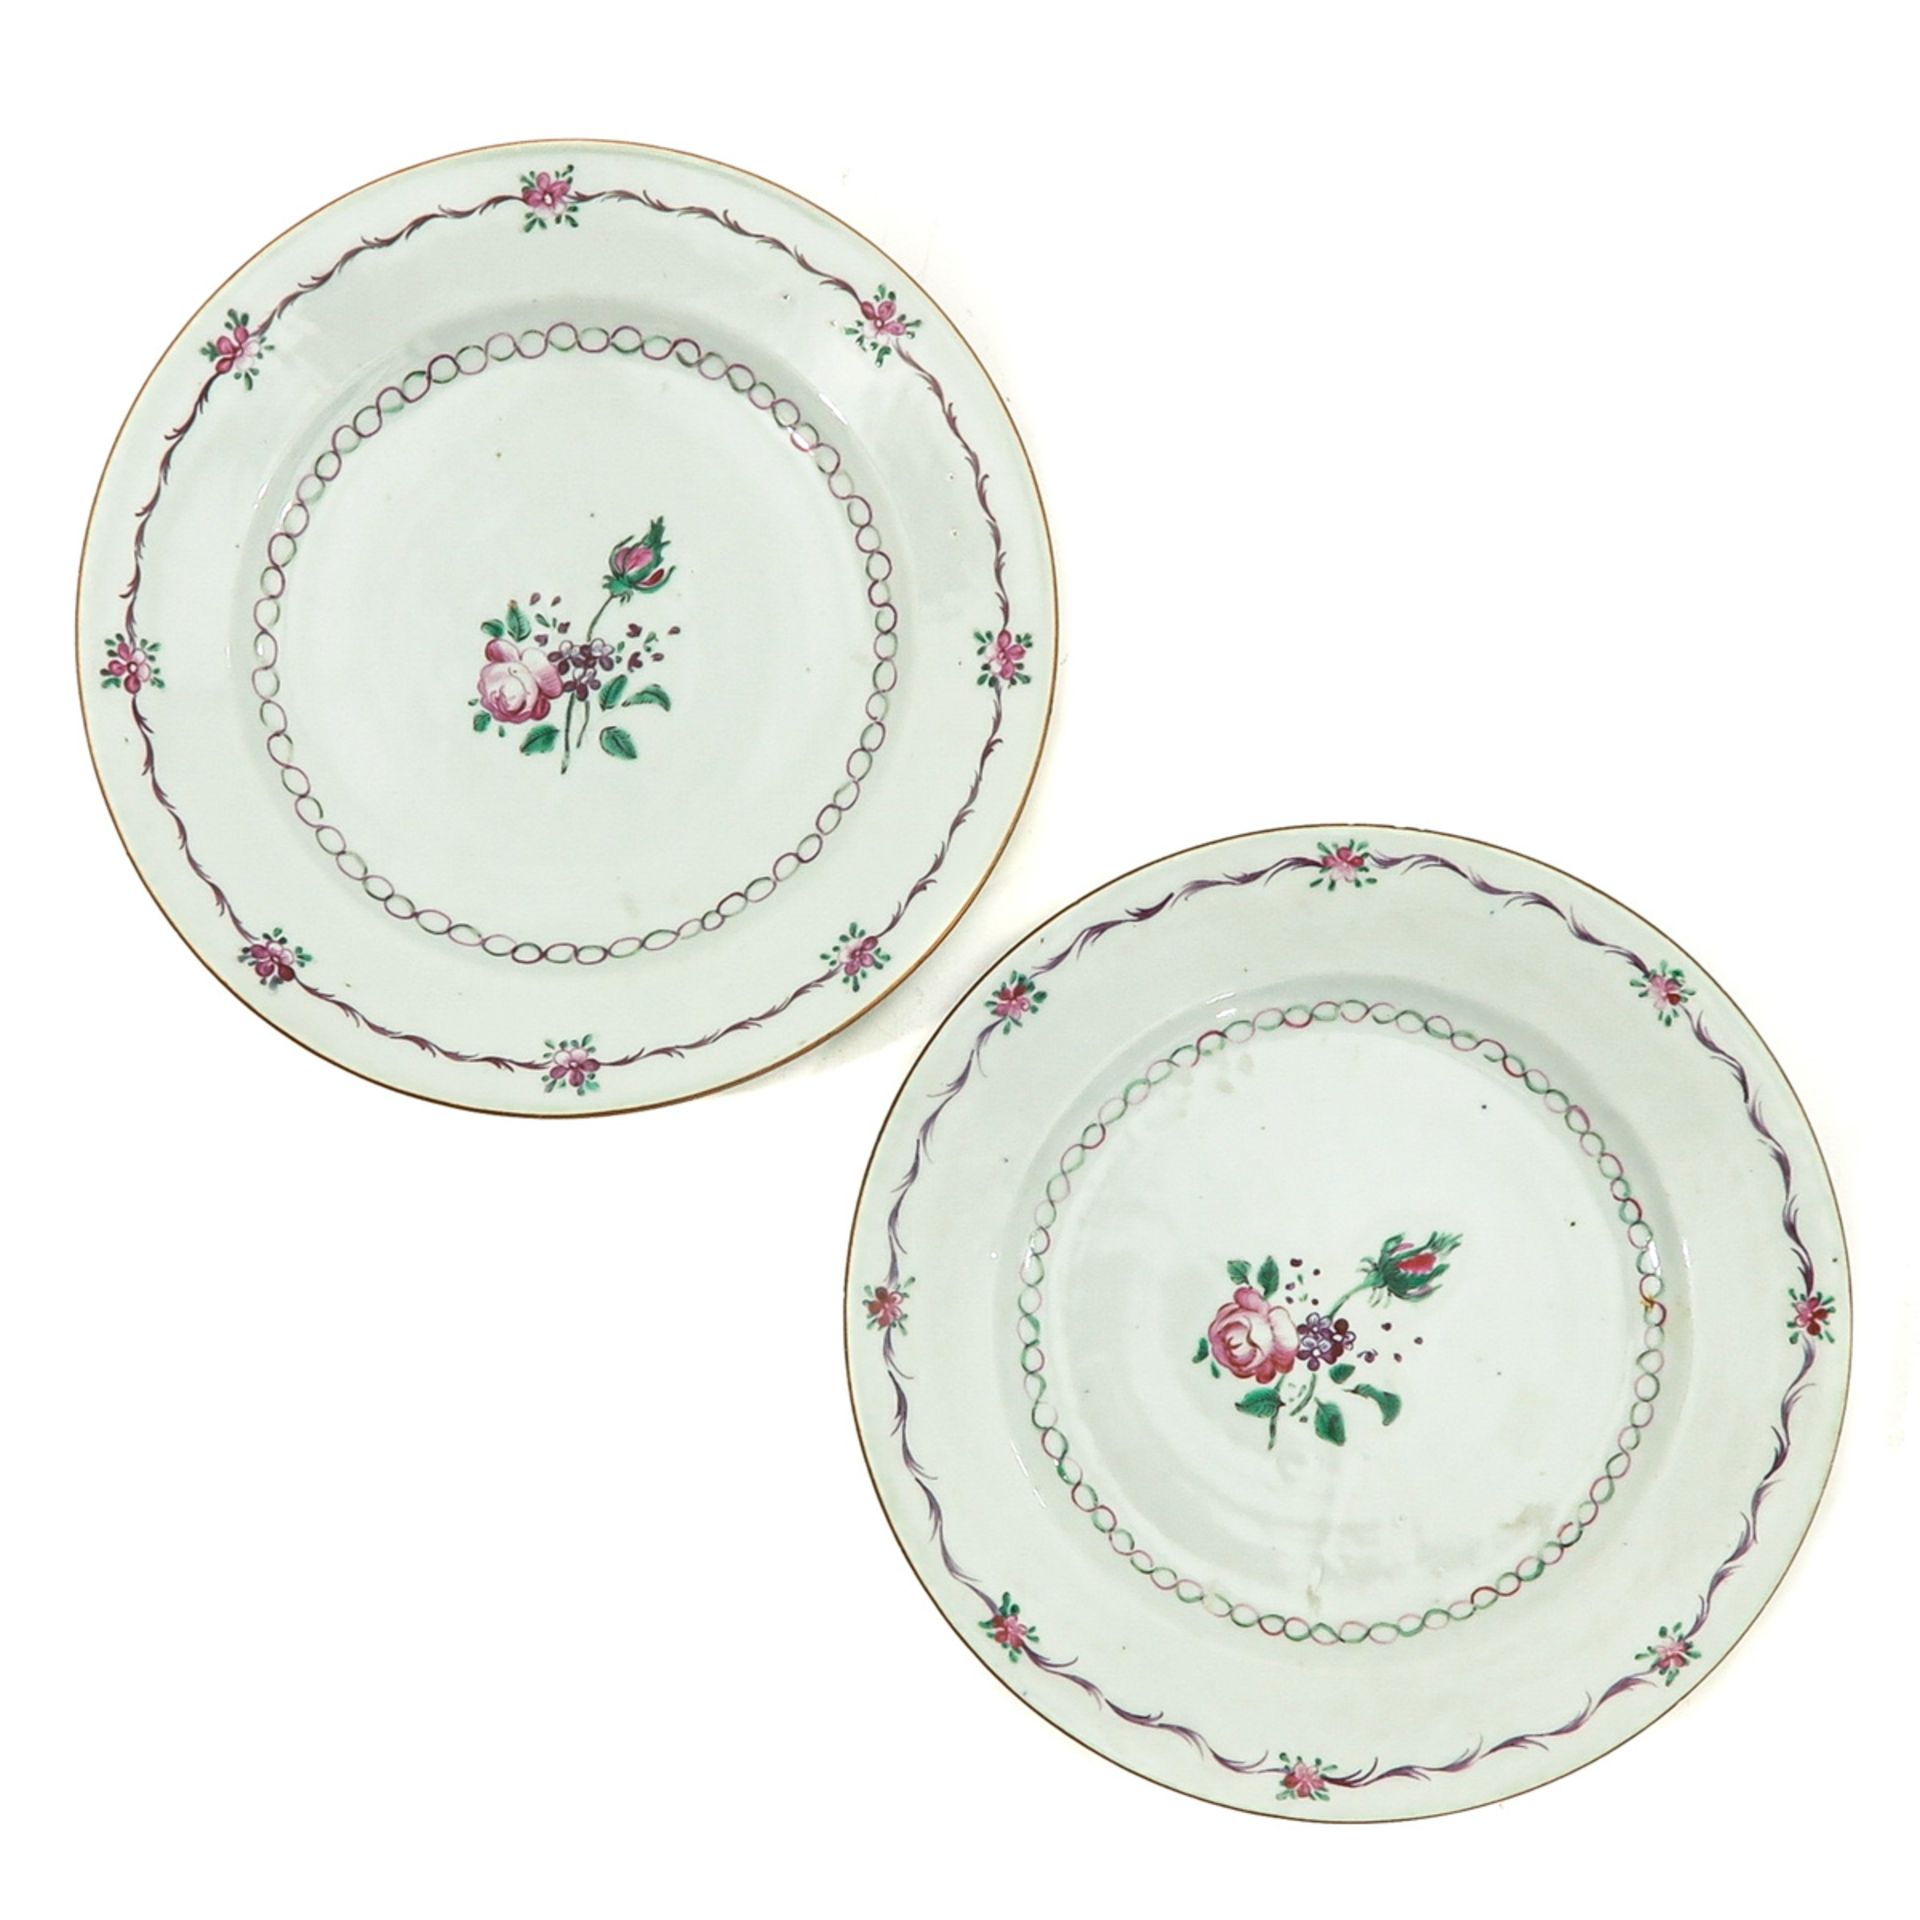 A Series of 4 Famille Rose Plates - Image 5 of 9